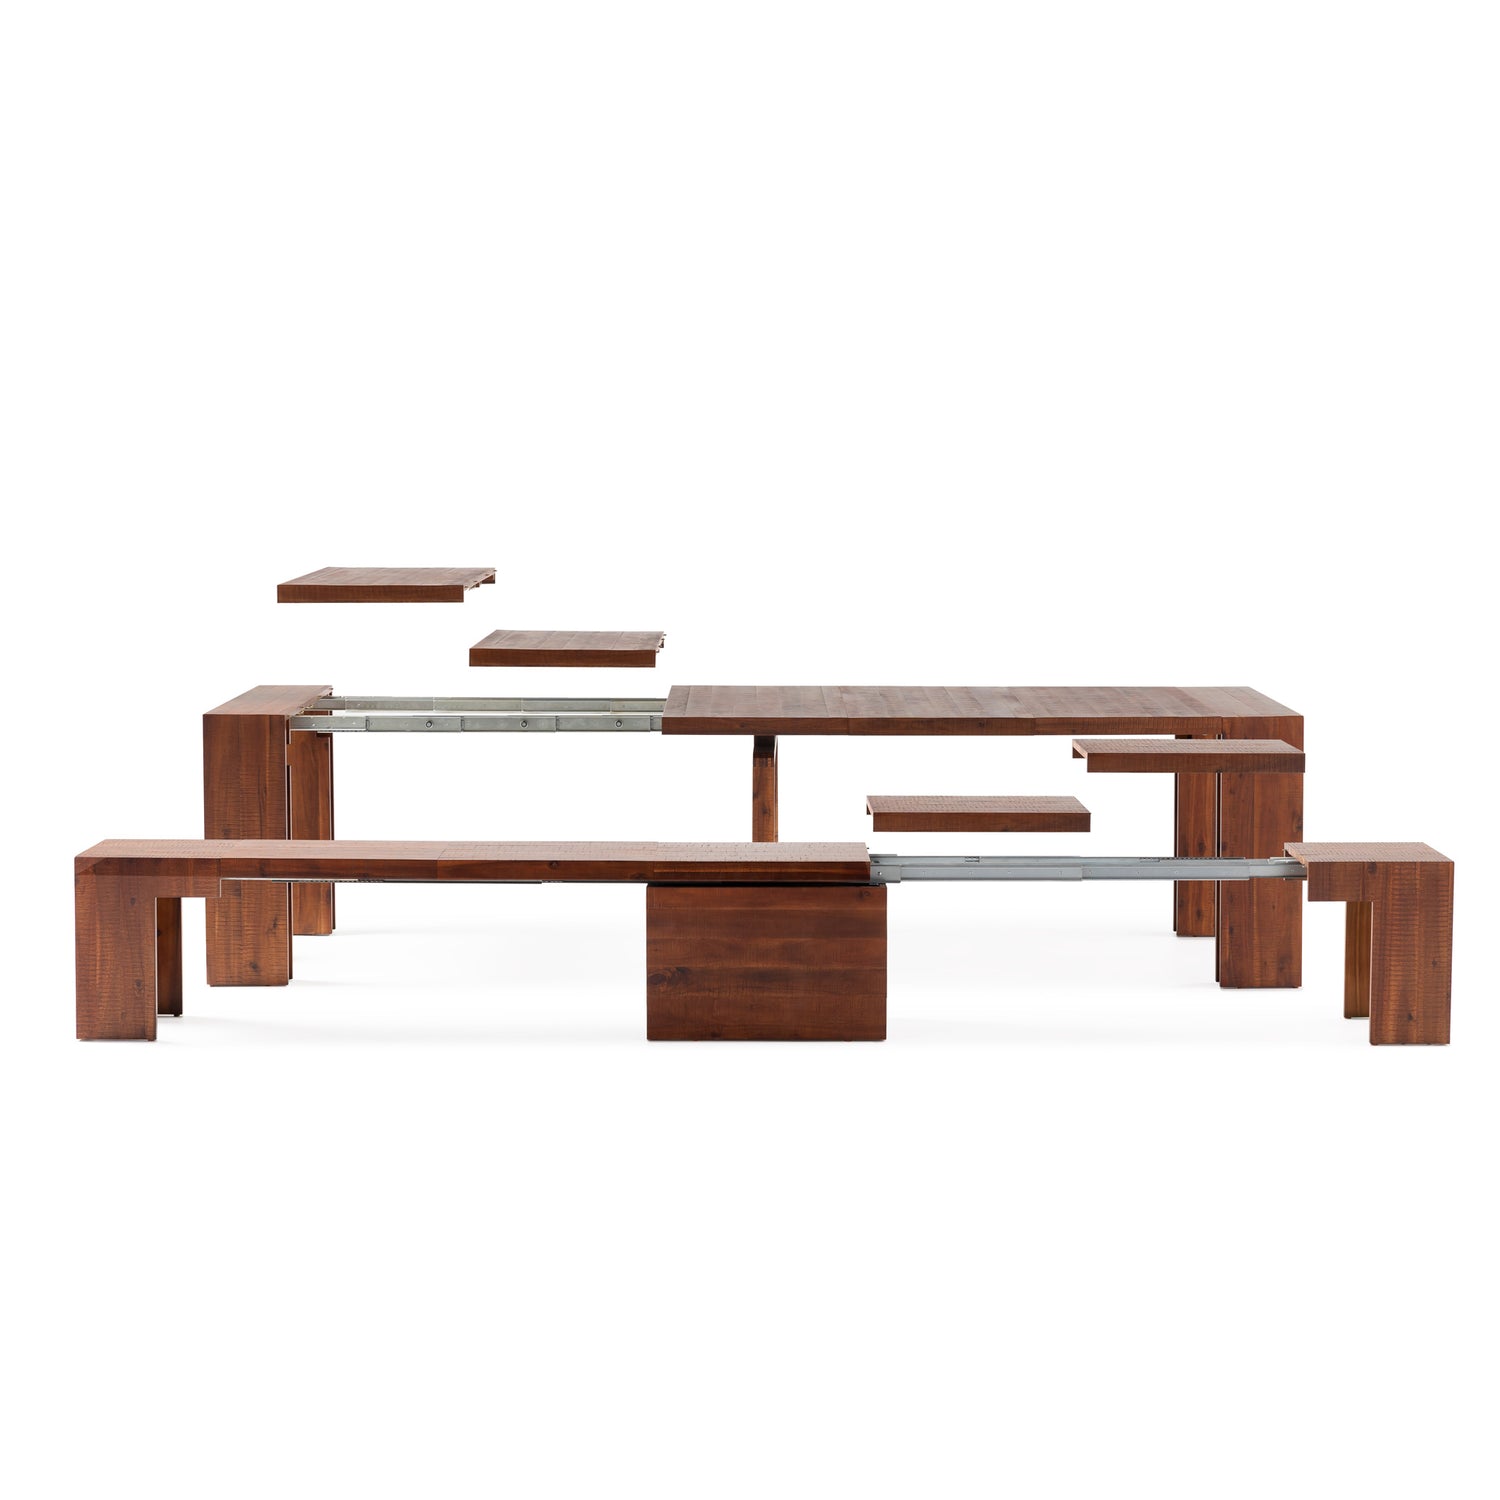 Transformer Dining Set 4.0 - The Practical